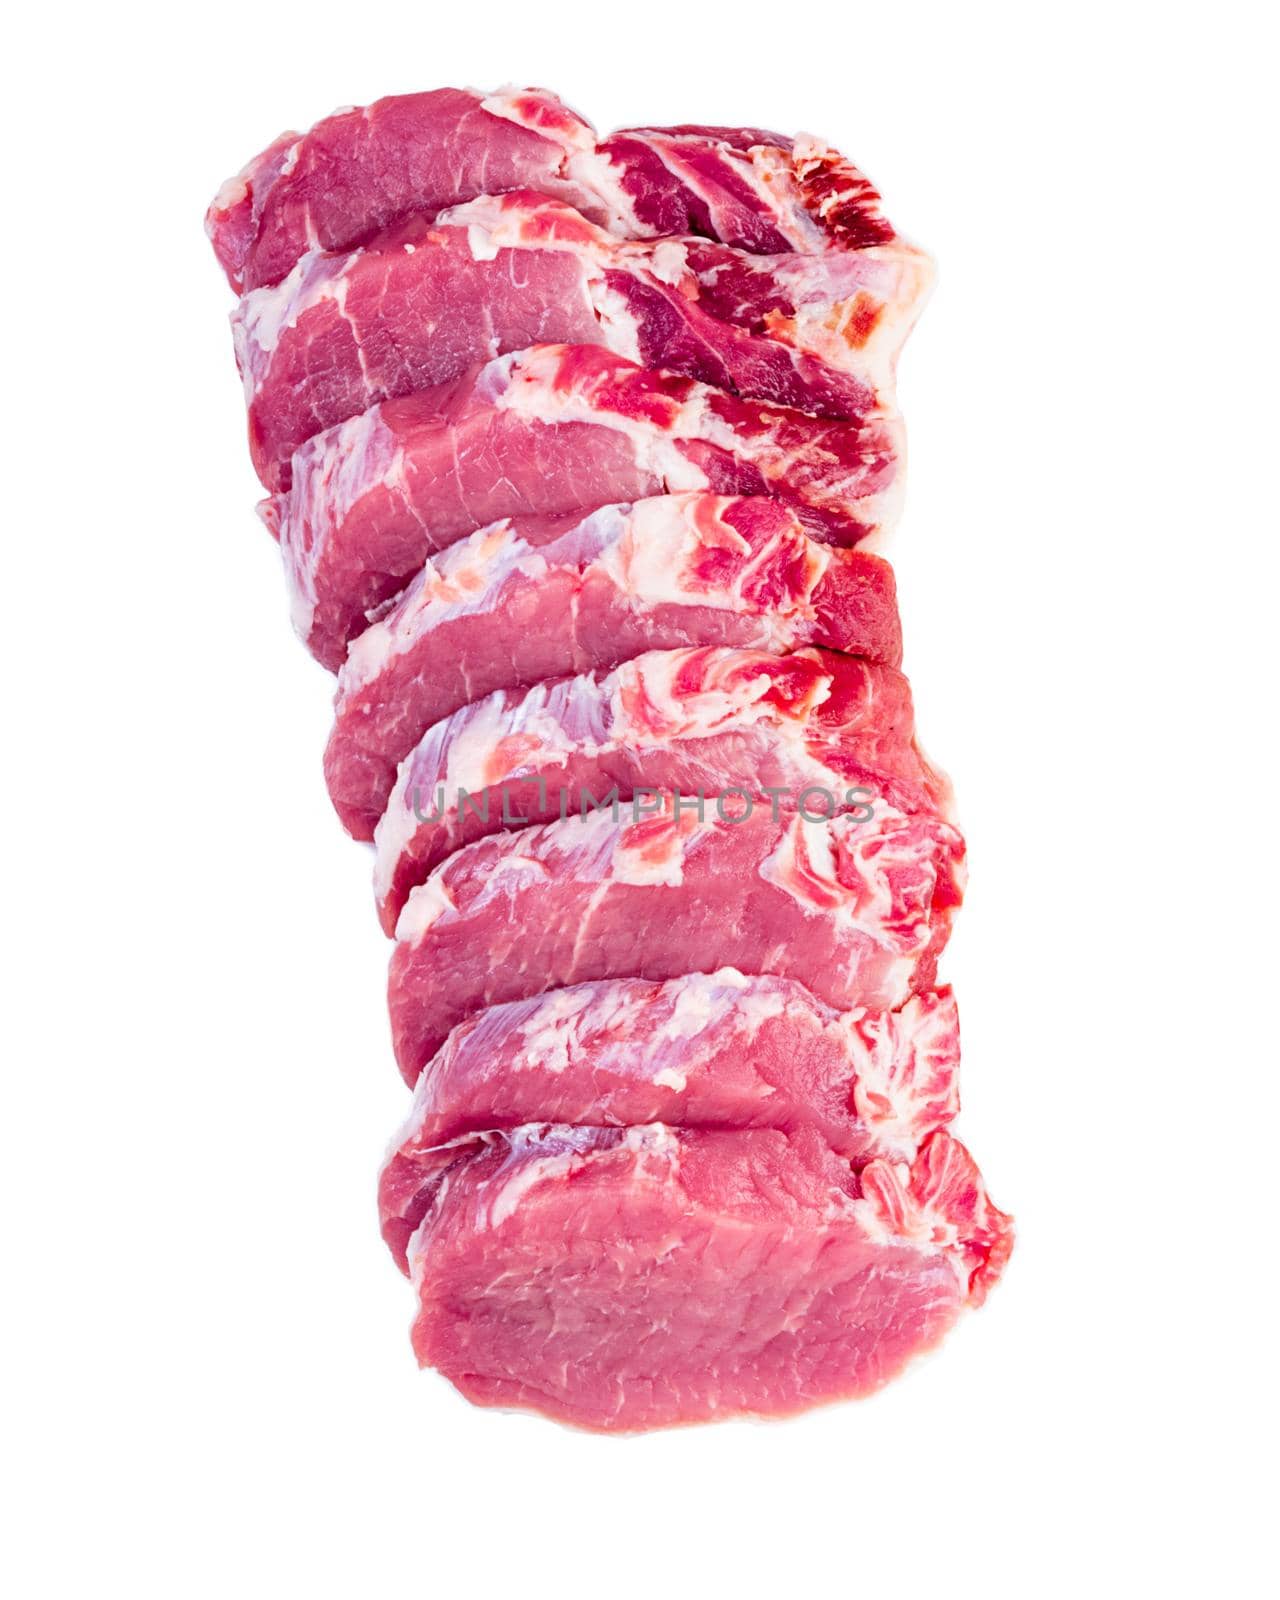 pork meat slices loin isolated on white background, top view, vertical by NataBene